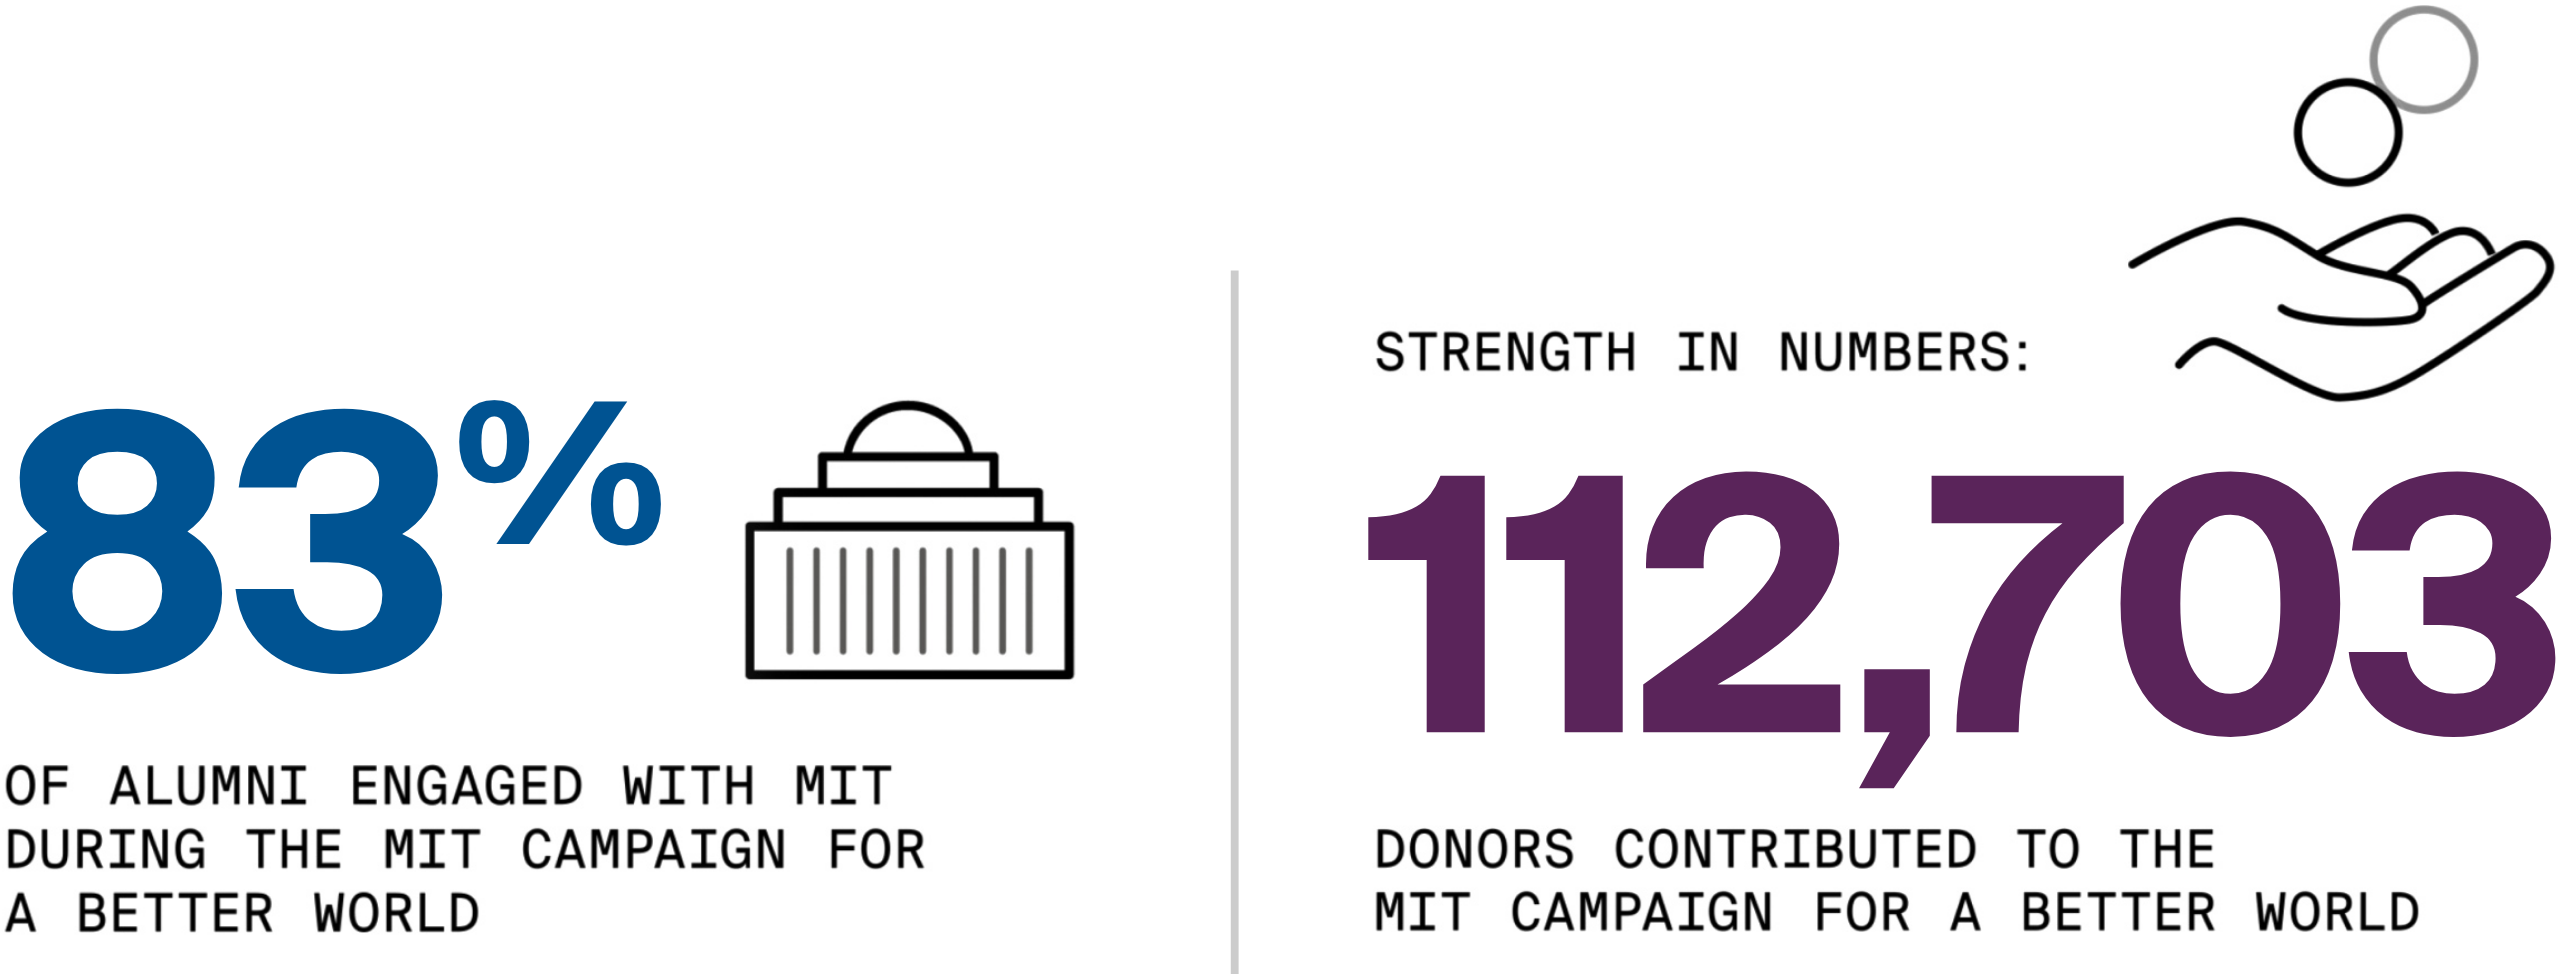 83% of alumni engaged with MIT during the MIT Campaign for a Better World. Strength in numbers: 112,703 donors contributed to the MIT Campaign for a Better World.